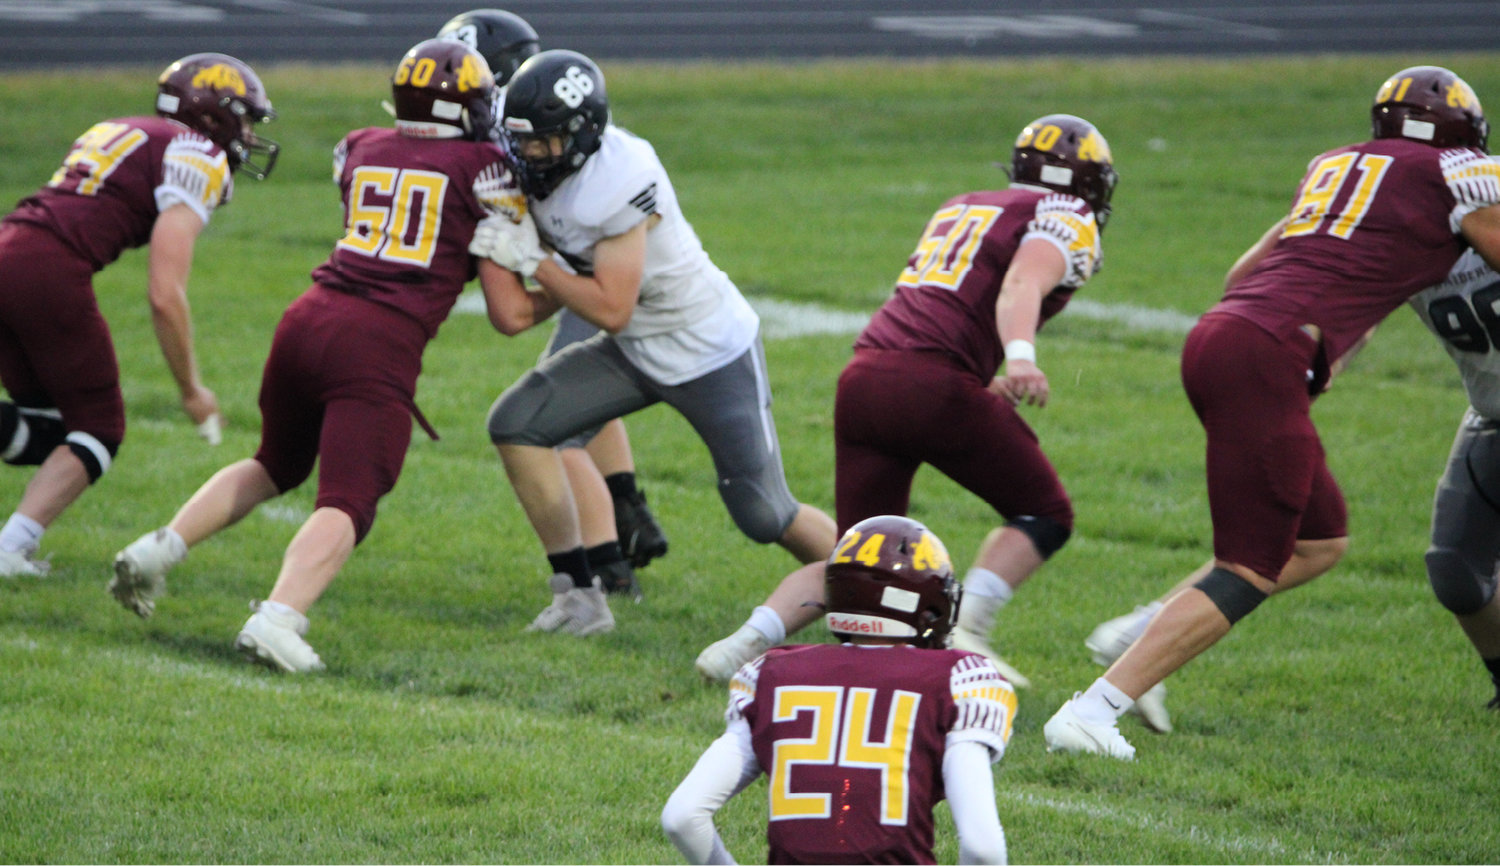 De Smet's defense, led up front by linemen Tucker Anderson (34), Noah Harrison (60), Dylan Rowcliffe (50) and Damon Wilkinson (34) allowed only a couple plays for positive yardage as they shut out Oldham-Ramona/Rutland 58-0, ending the game in the first half Friday night in De Smet.